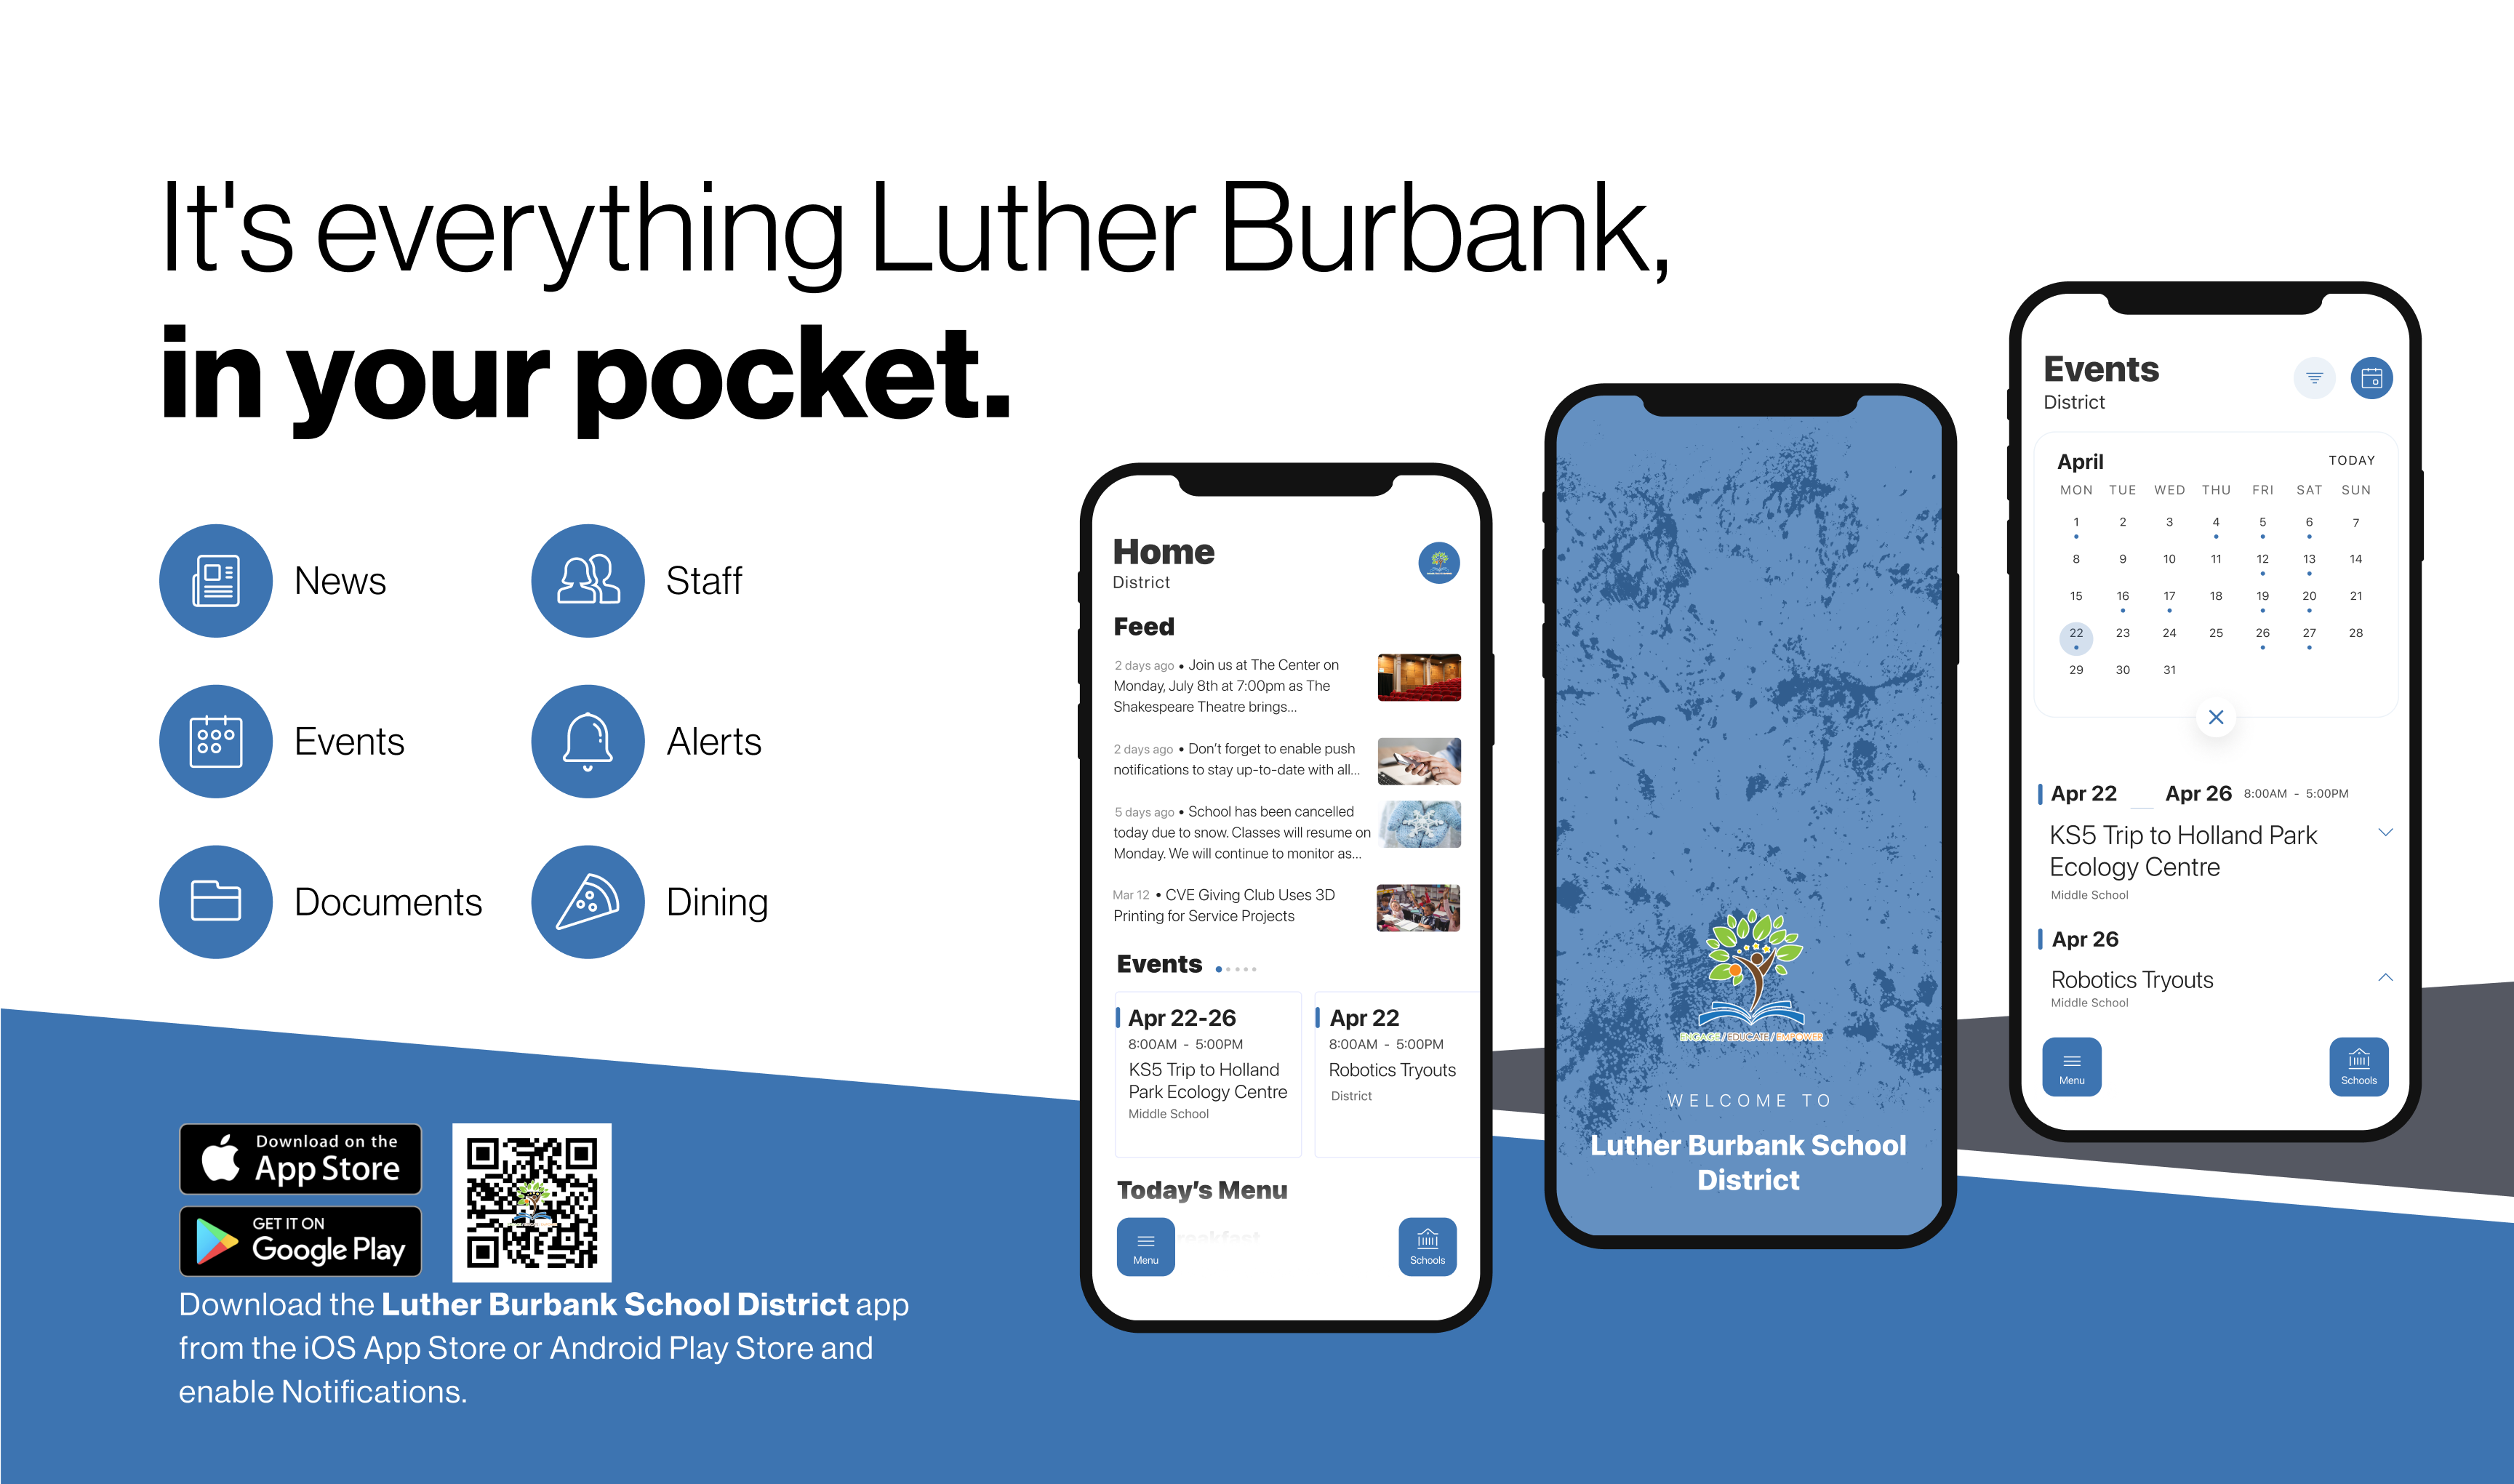 It's Everything Luther Burbank in your pocket 